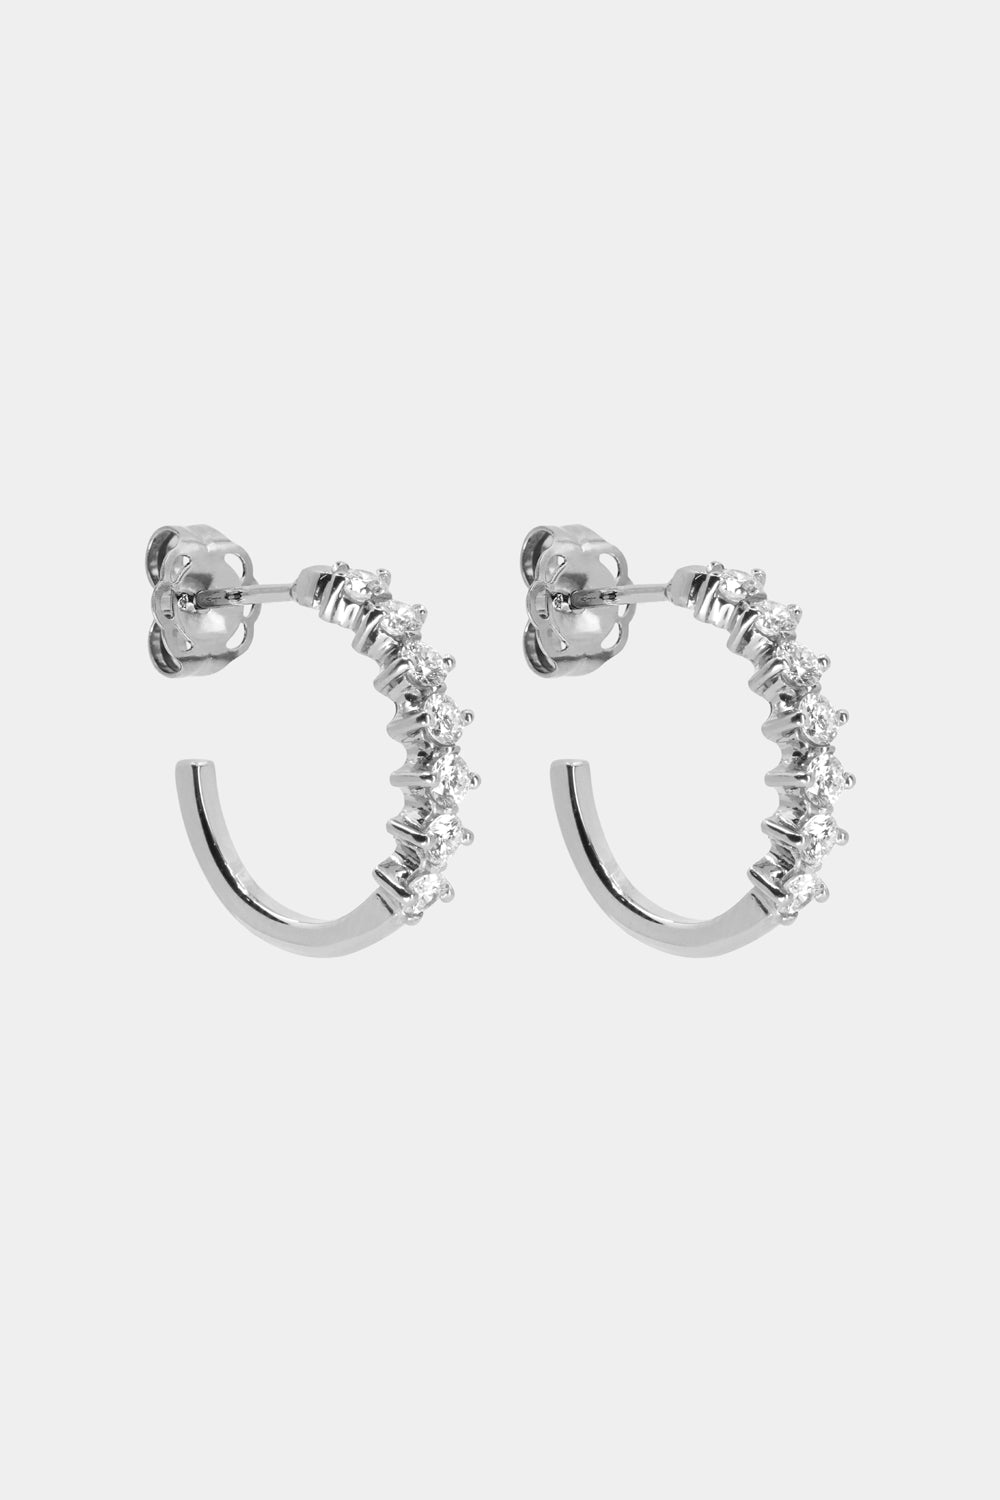 Buttercup Diamond Hoops | White Gold, More Options Available| Natasha Schweitzer